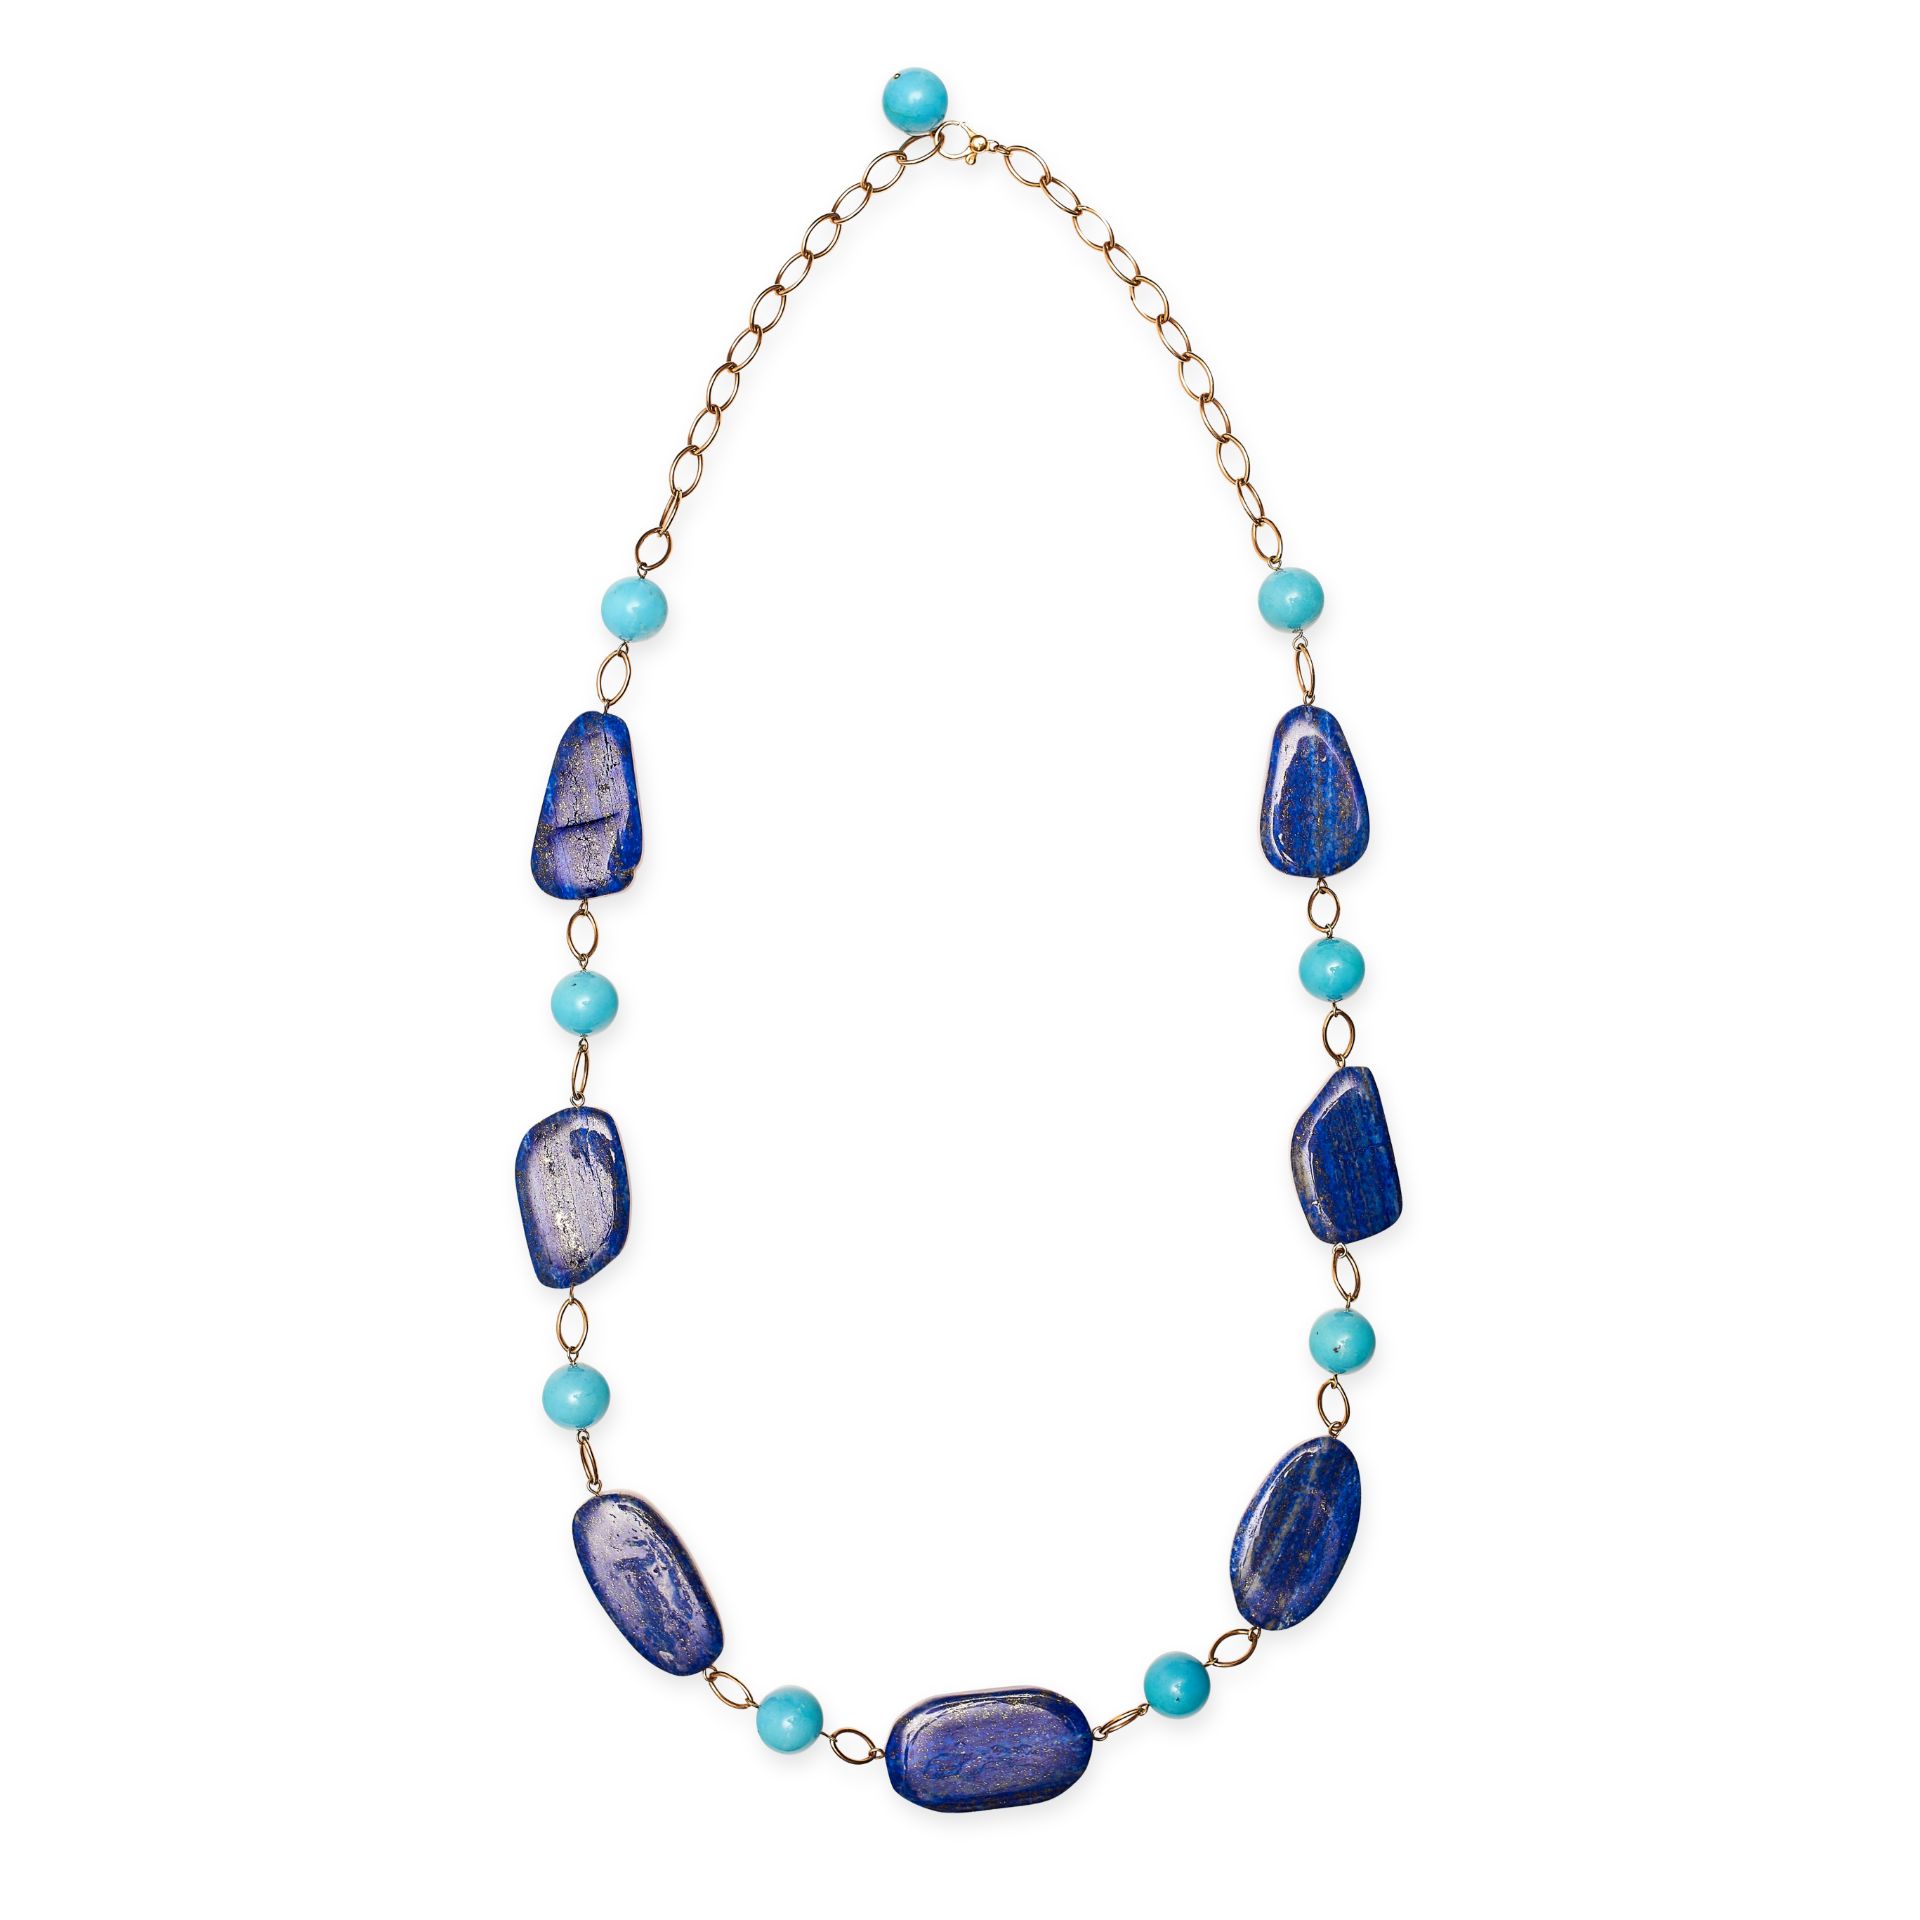 A TURQUOISE AND LAPIS LAZULI NECKLACE in 18ct yellow gold, formed of nine flattened polished